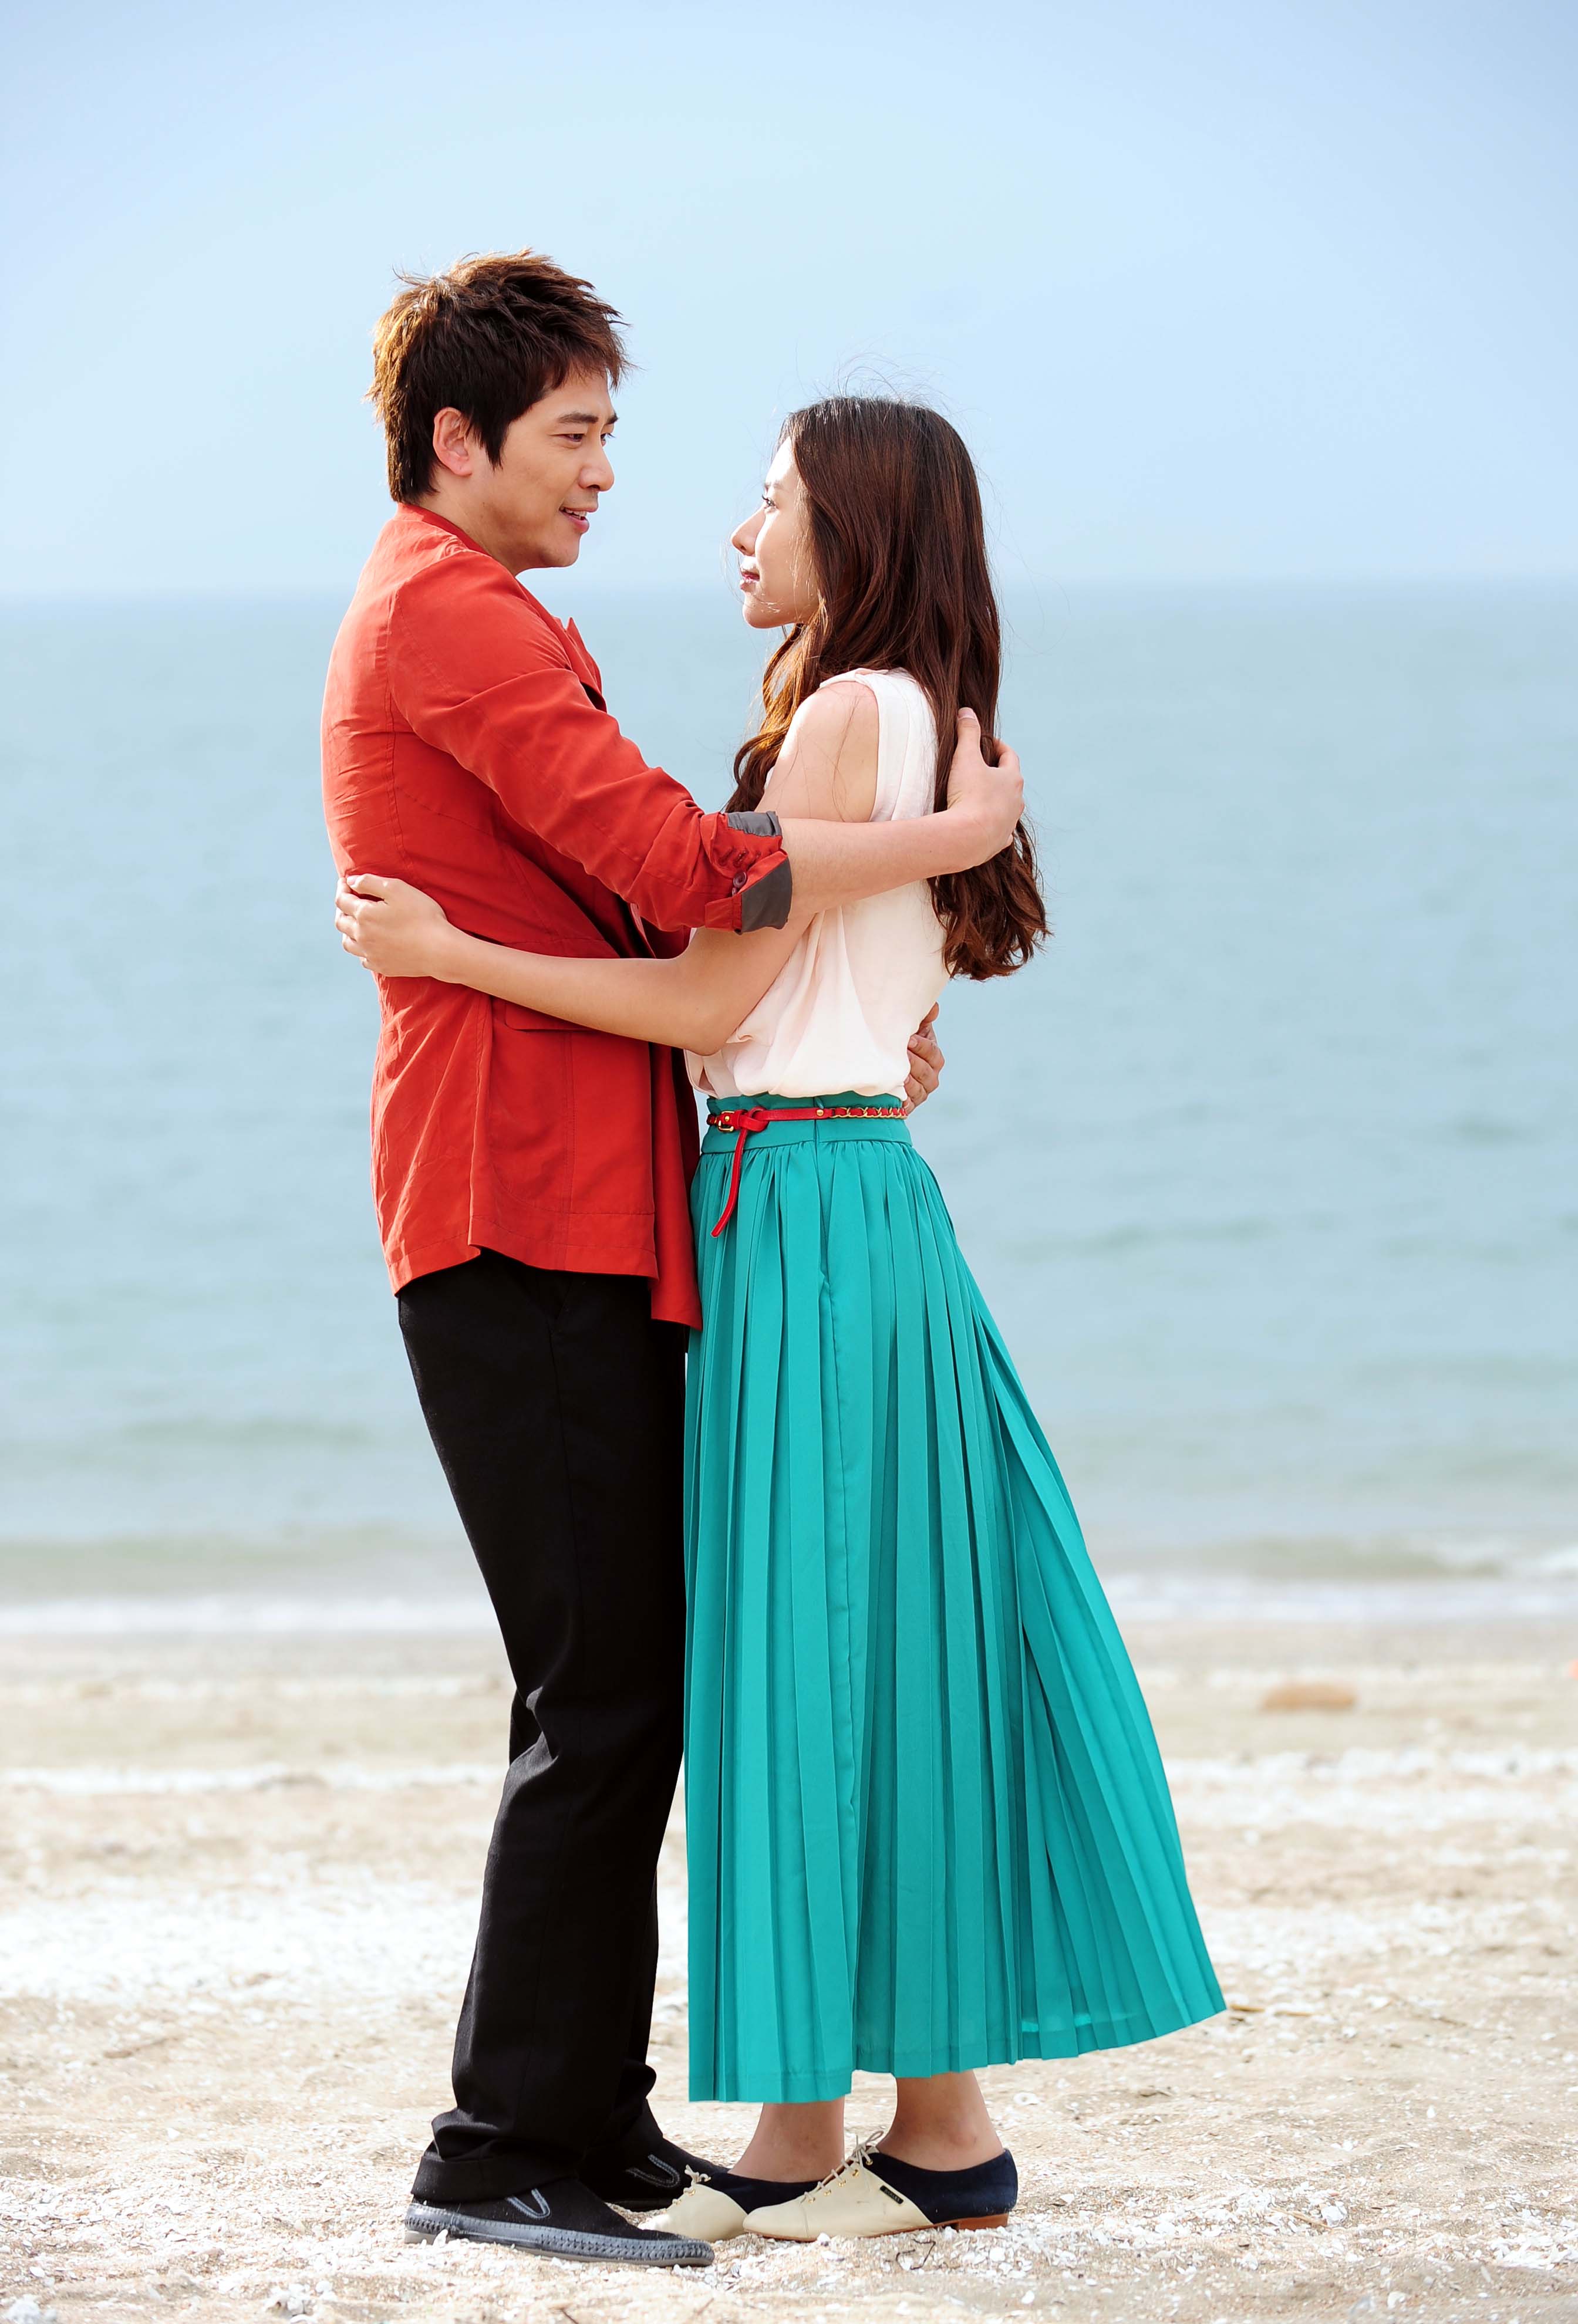 K-DRAMA NEWS] Lie to me, episode 8 preview photos « thedramascenes.